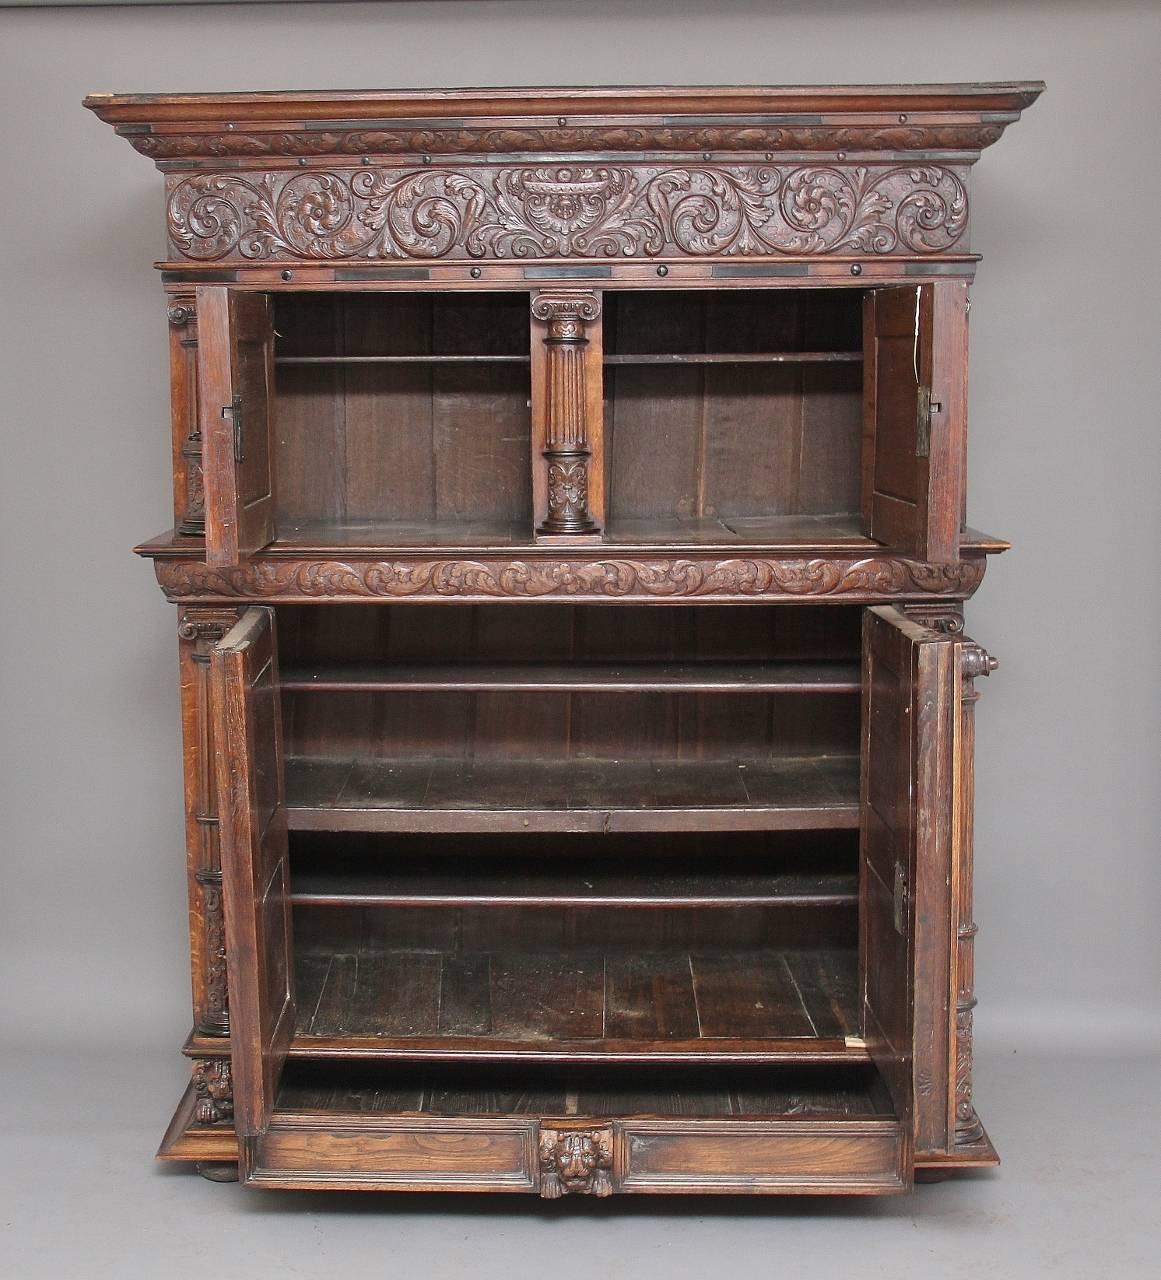 18th century carved Flemish oak cupboard.
A lovely quality early 18th century Flemish carved oak cupboard with two small doors above two large doors with a single drawer below, the top having a deep ogee moulded cornice with a frieze below which is